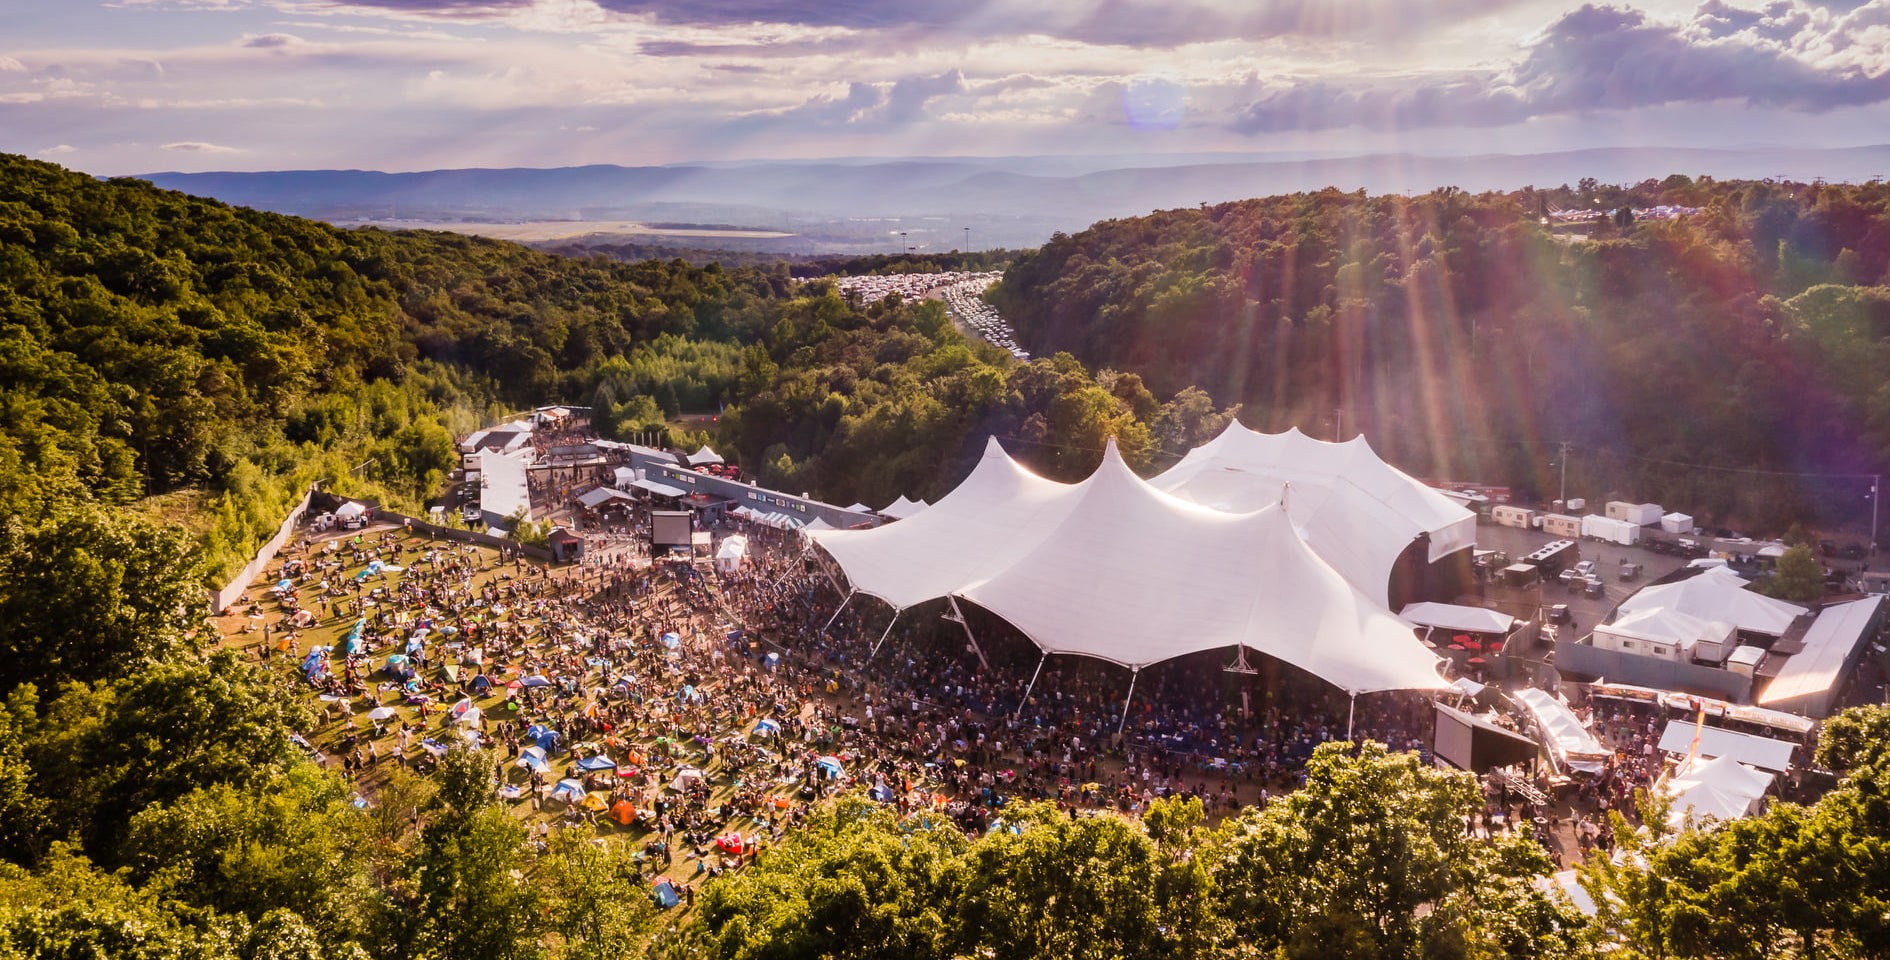 Preview The Peach Music Festival Returns to Scranton for Its 10th